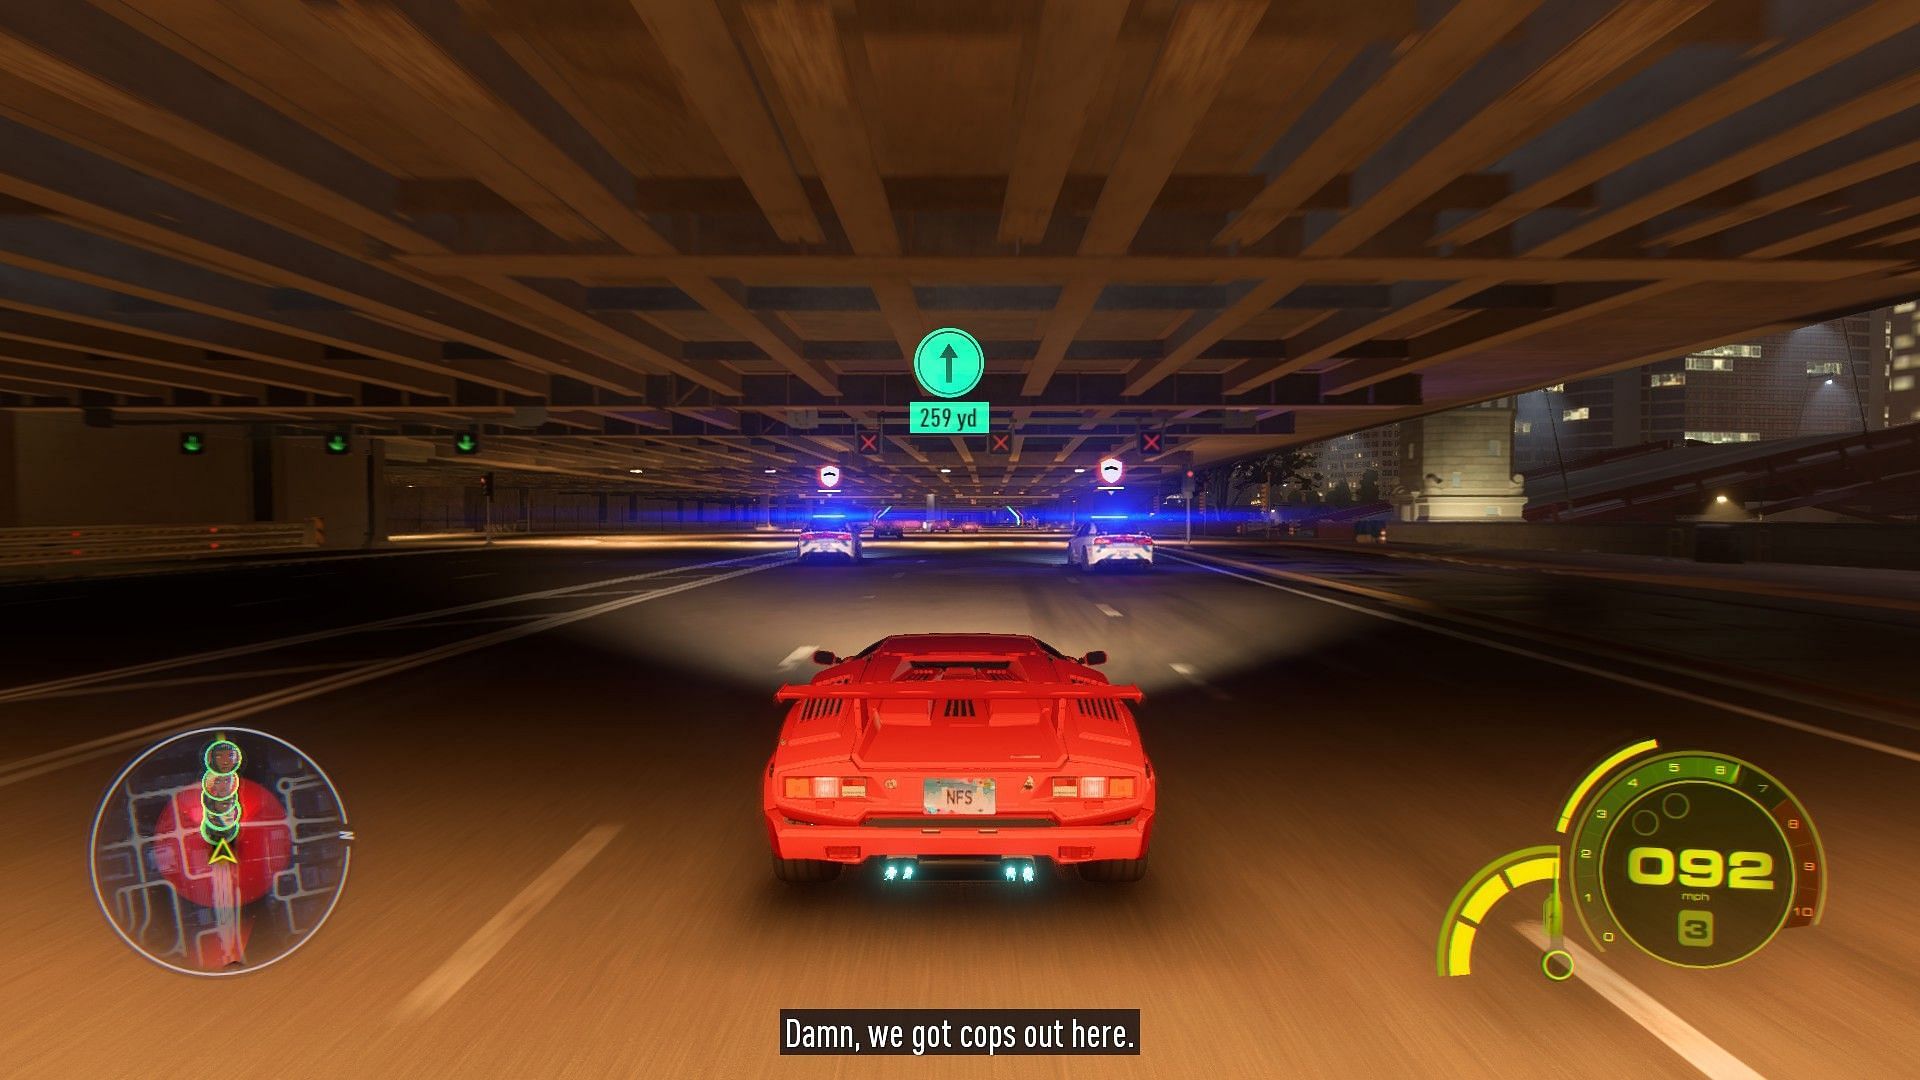 The sense of speed in Need for Speed (Image via Need for Speed Unbound)